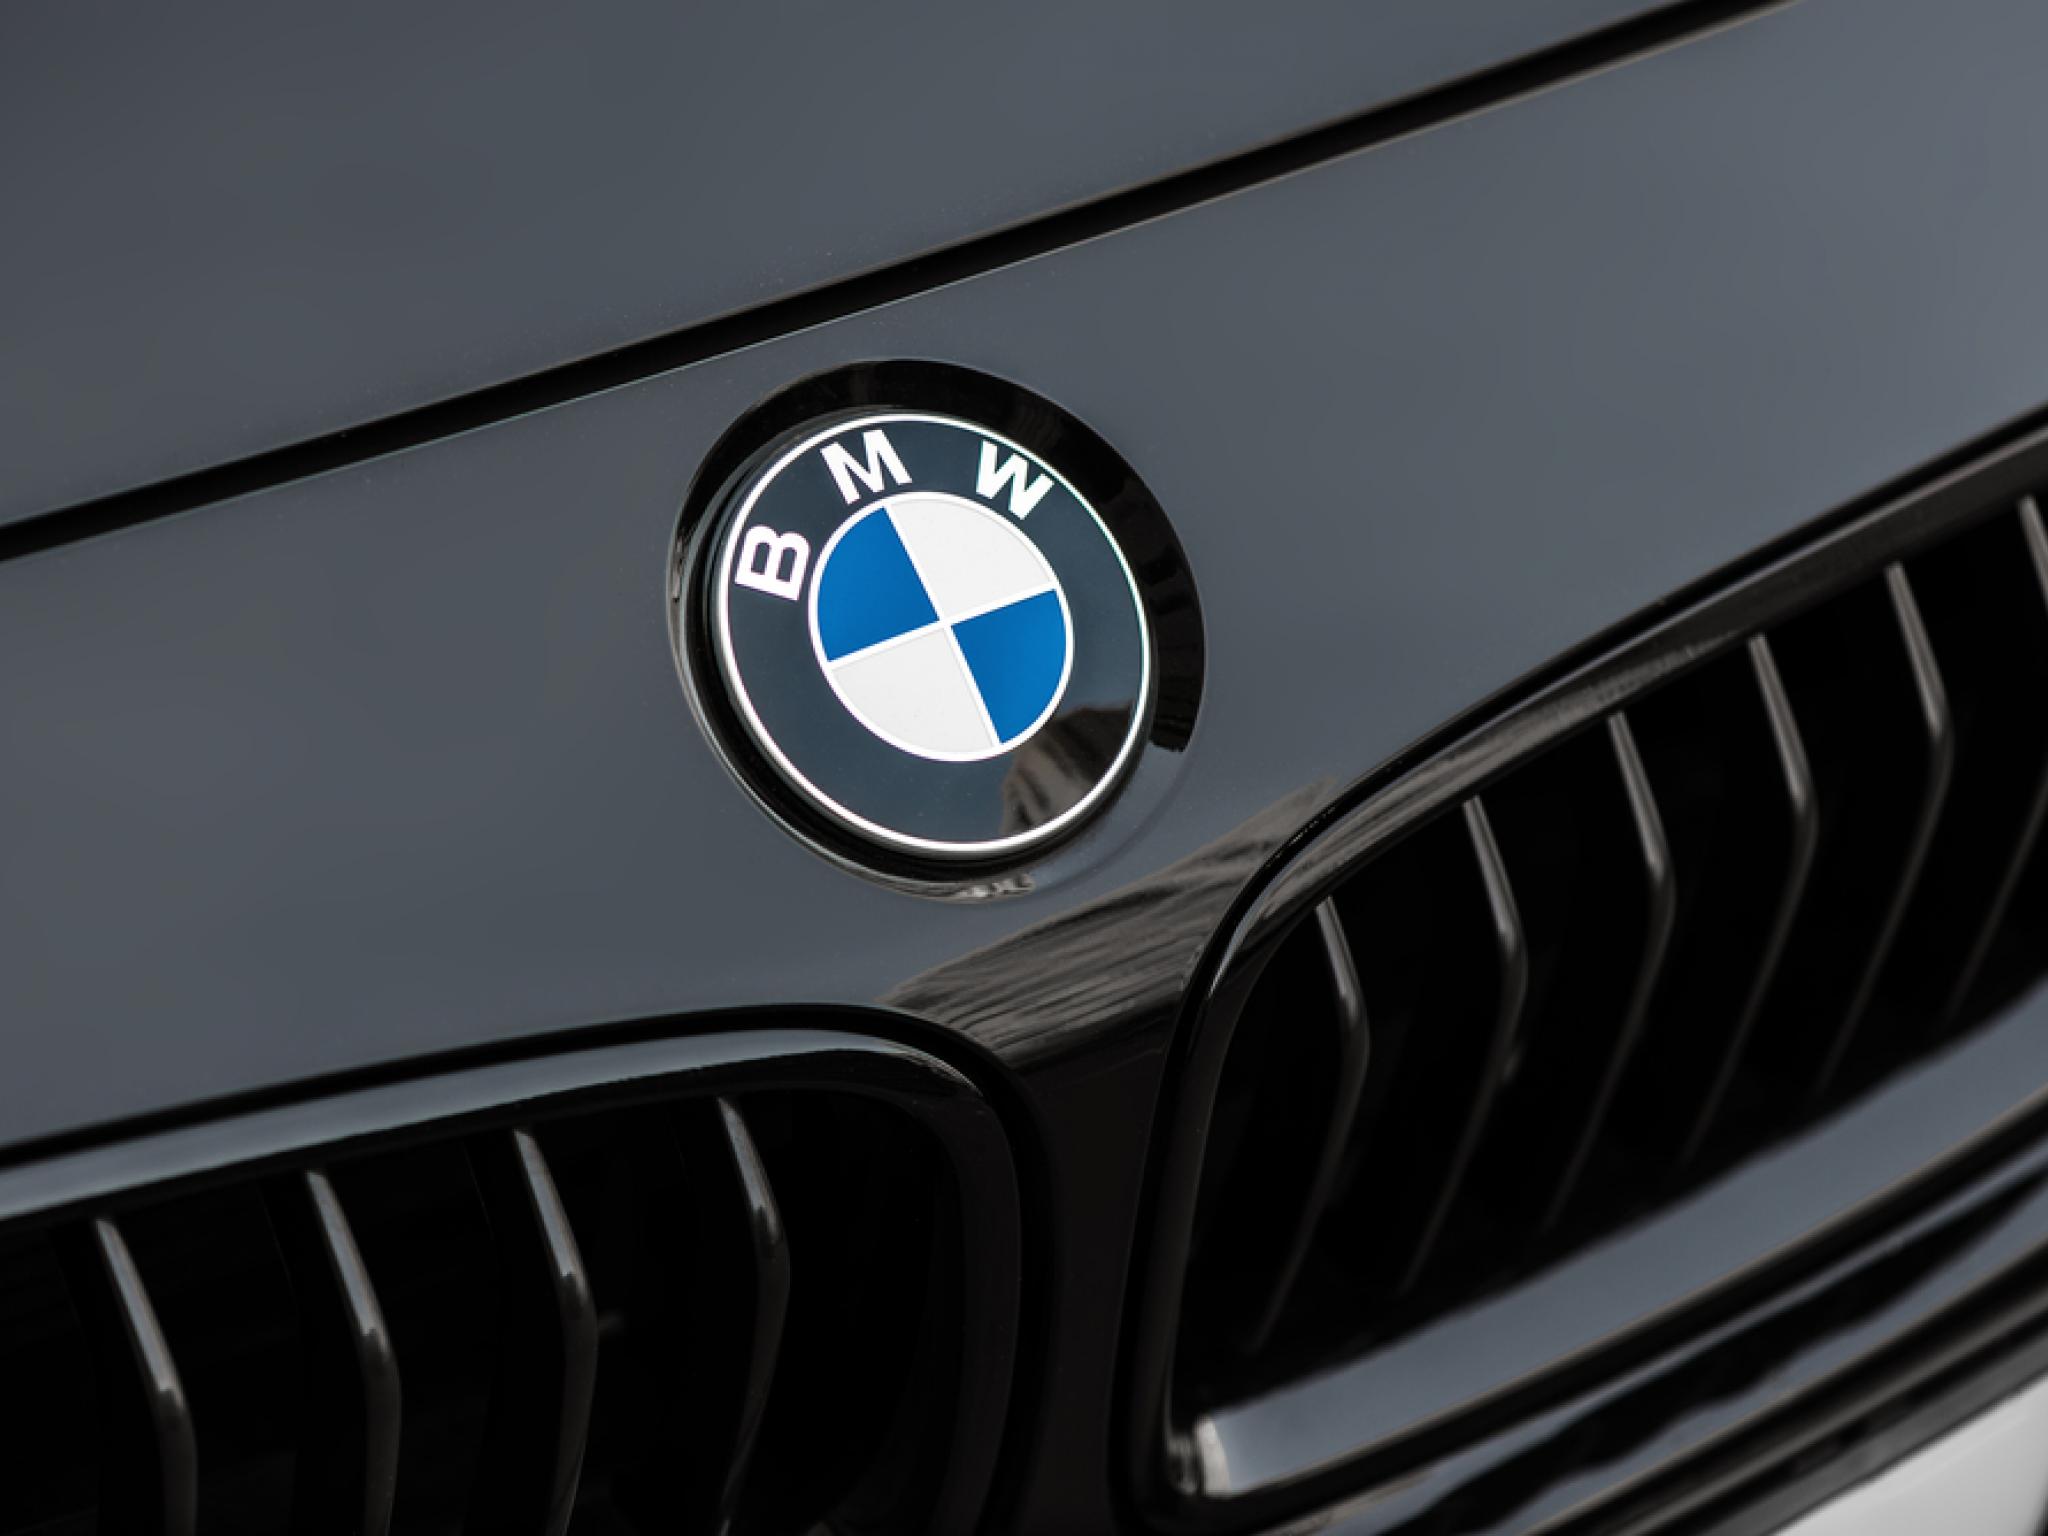  bmw-shifts-gears-with-analog-devices-eb-ethernet-technology-for-enhanced-vehicle-connectivity 